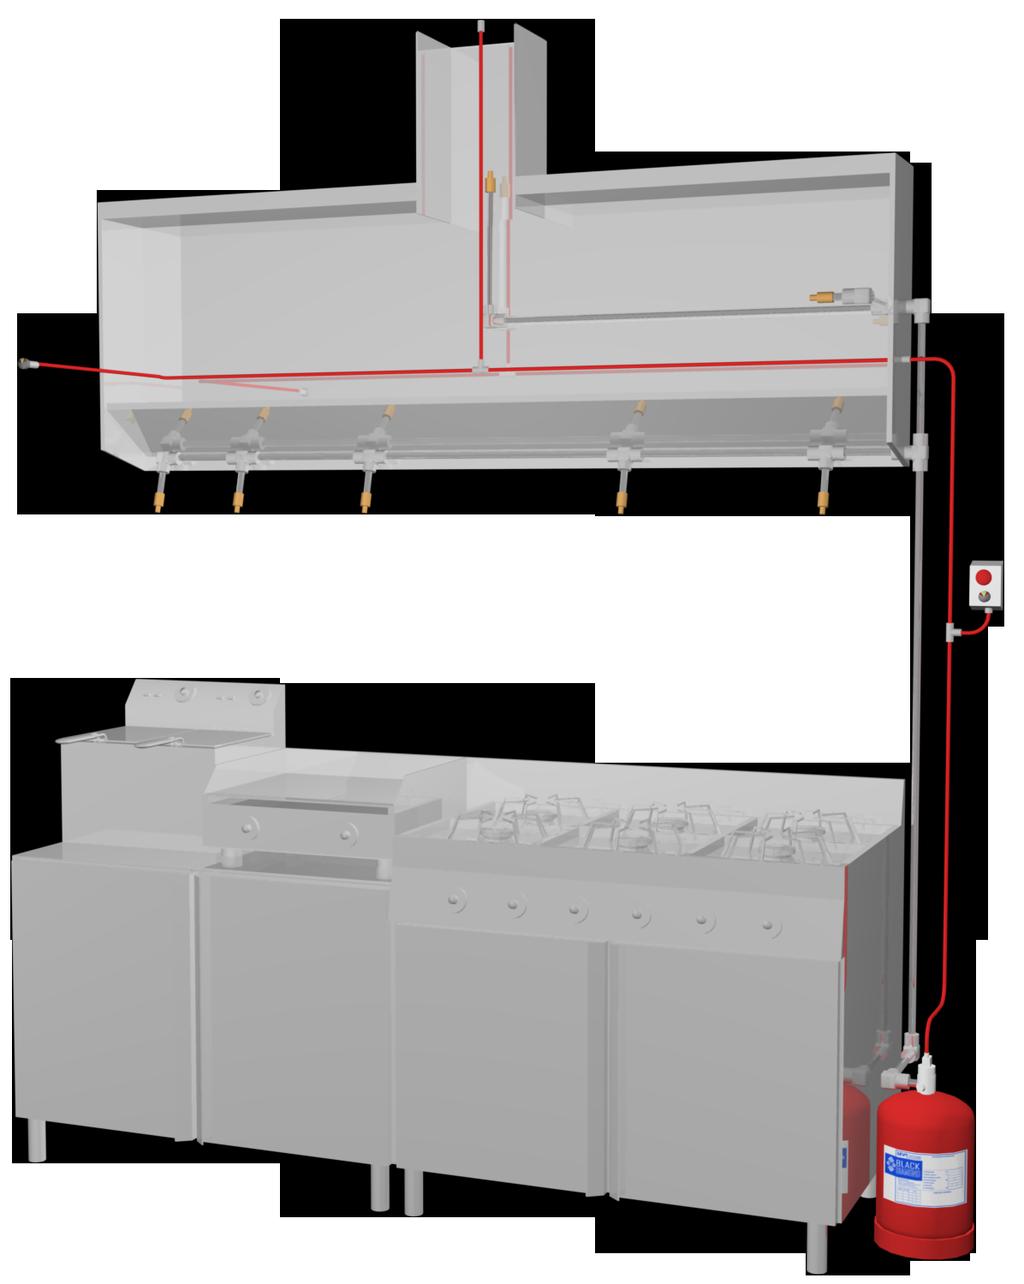 FIRE PROTECTION FOR INDUTRIAL KITCHENS KITCHEN FIRES COST MILLIONS OF DOLLARS IN ANNUAL LOSSES Detection system An effective fire detection system is essential to minimizing the damage from a fire.